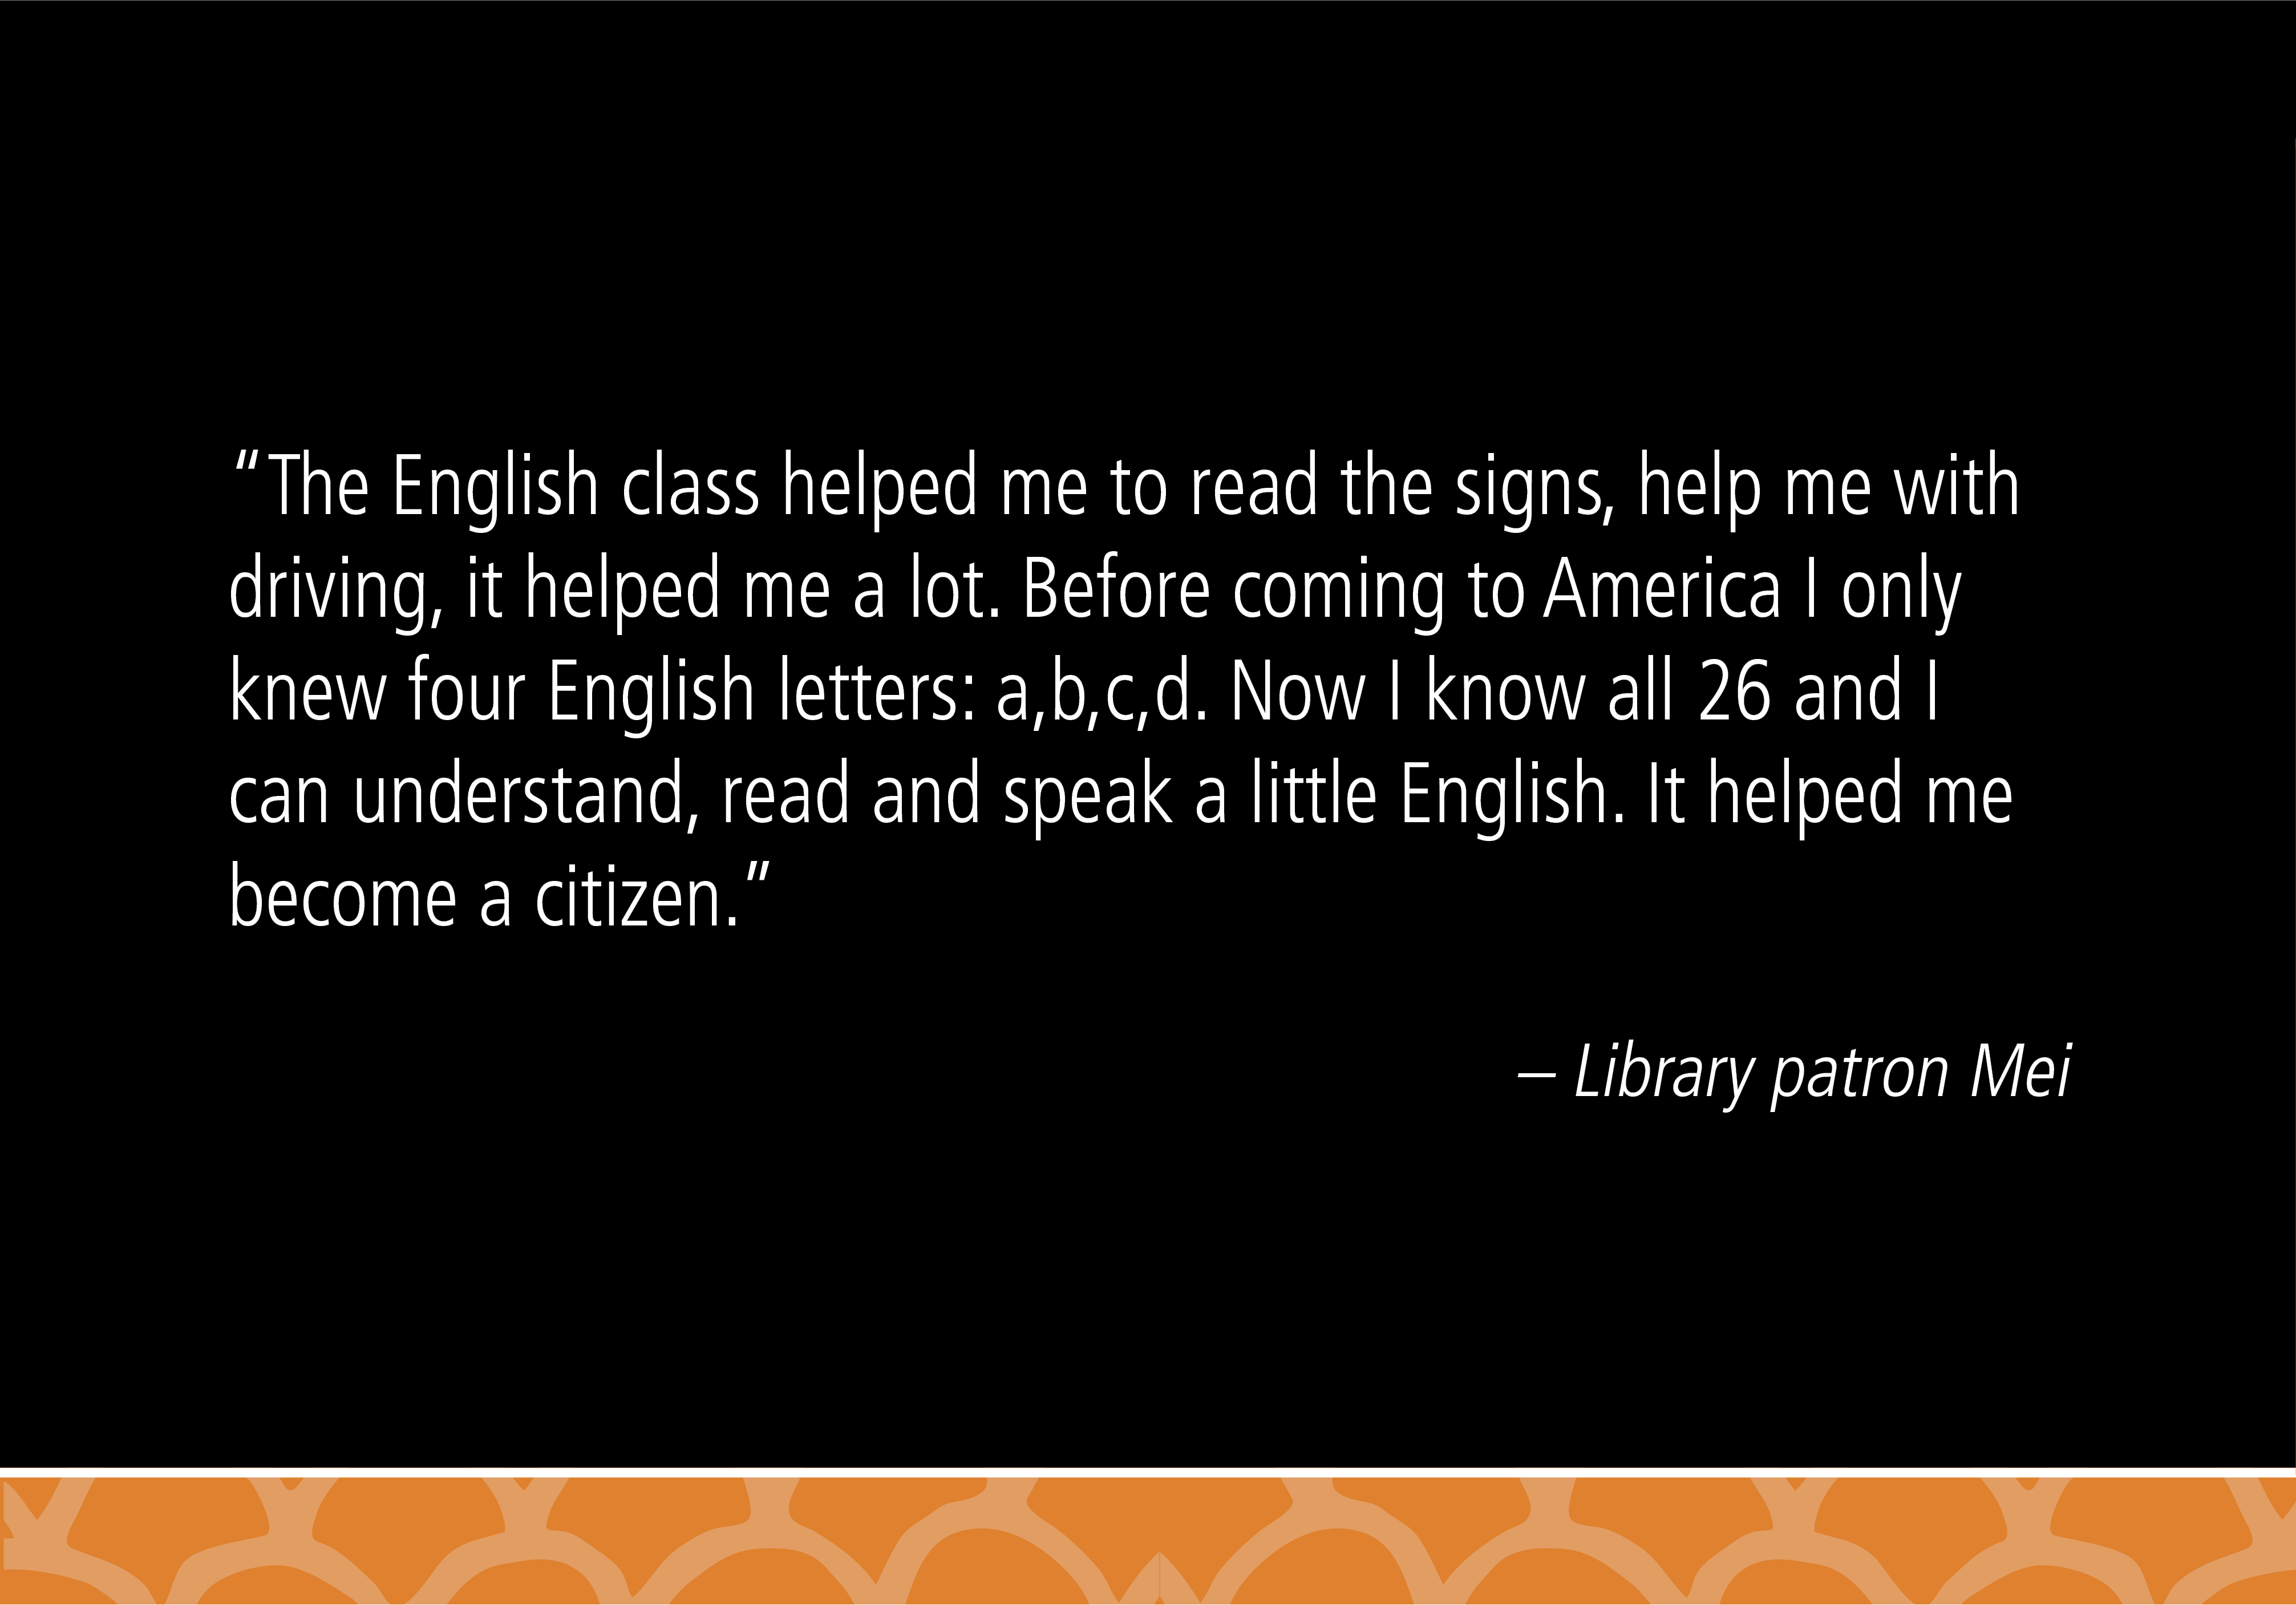 "The English class helped me to read the signs, help me with driving, it helped me a lot. Before coming to America I only knew four English letters: a, b, c, d. Now I know all 26 and I can understand, read and speak a little English. It helped me become a citizen." - Library patron Mei 